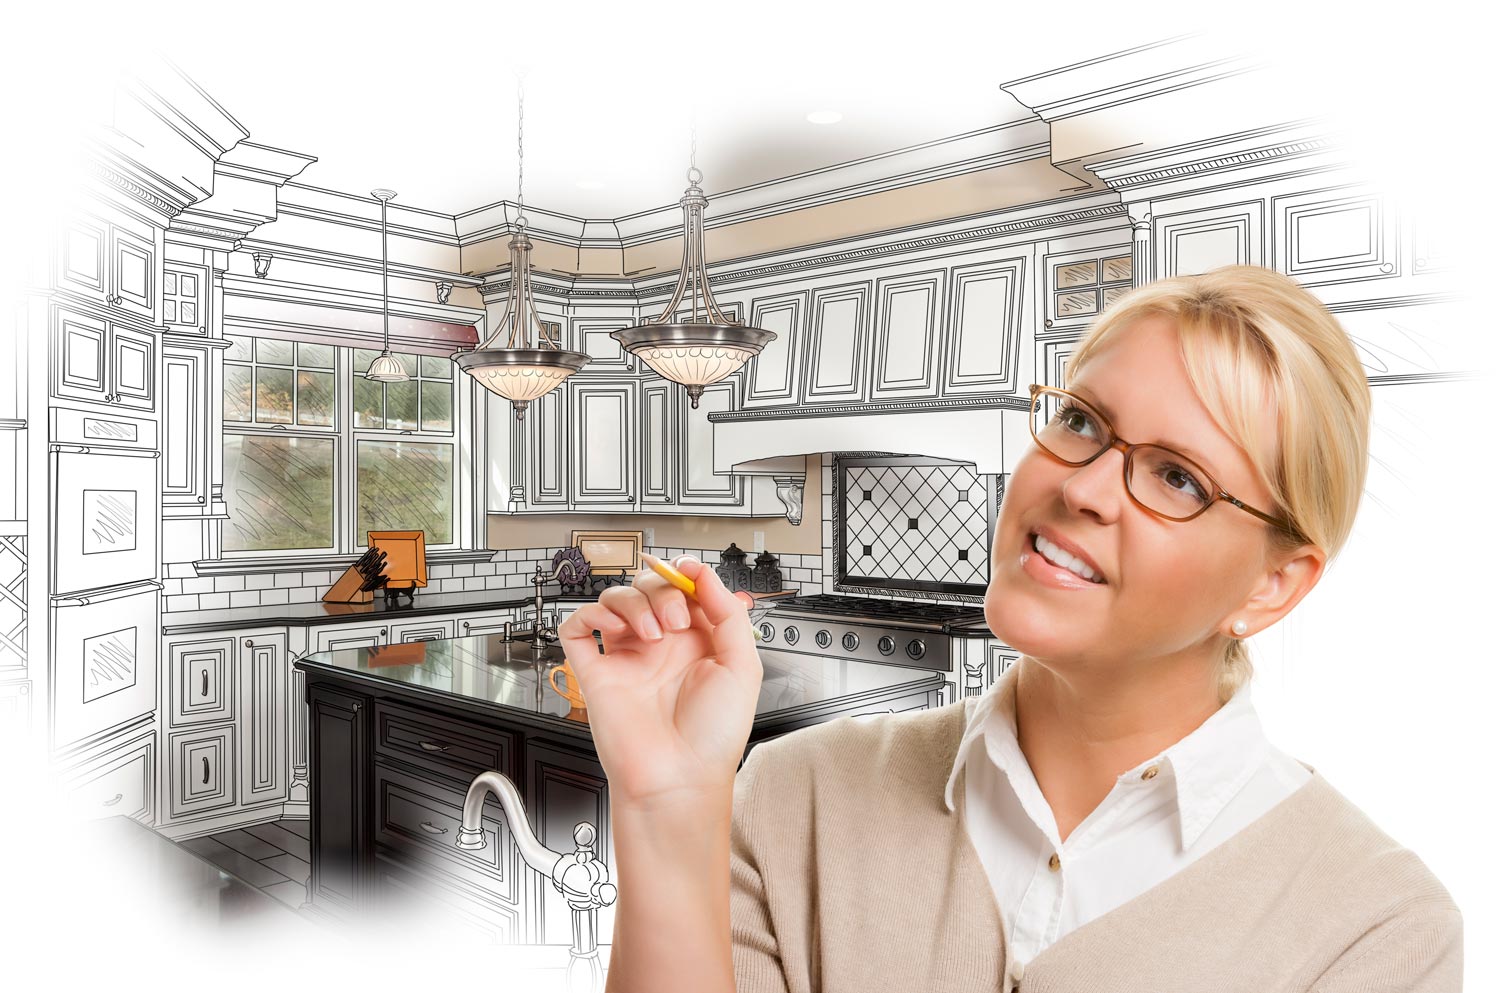 Why Use a Professional Kitchen Designer?